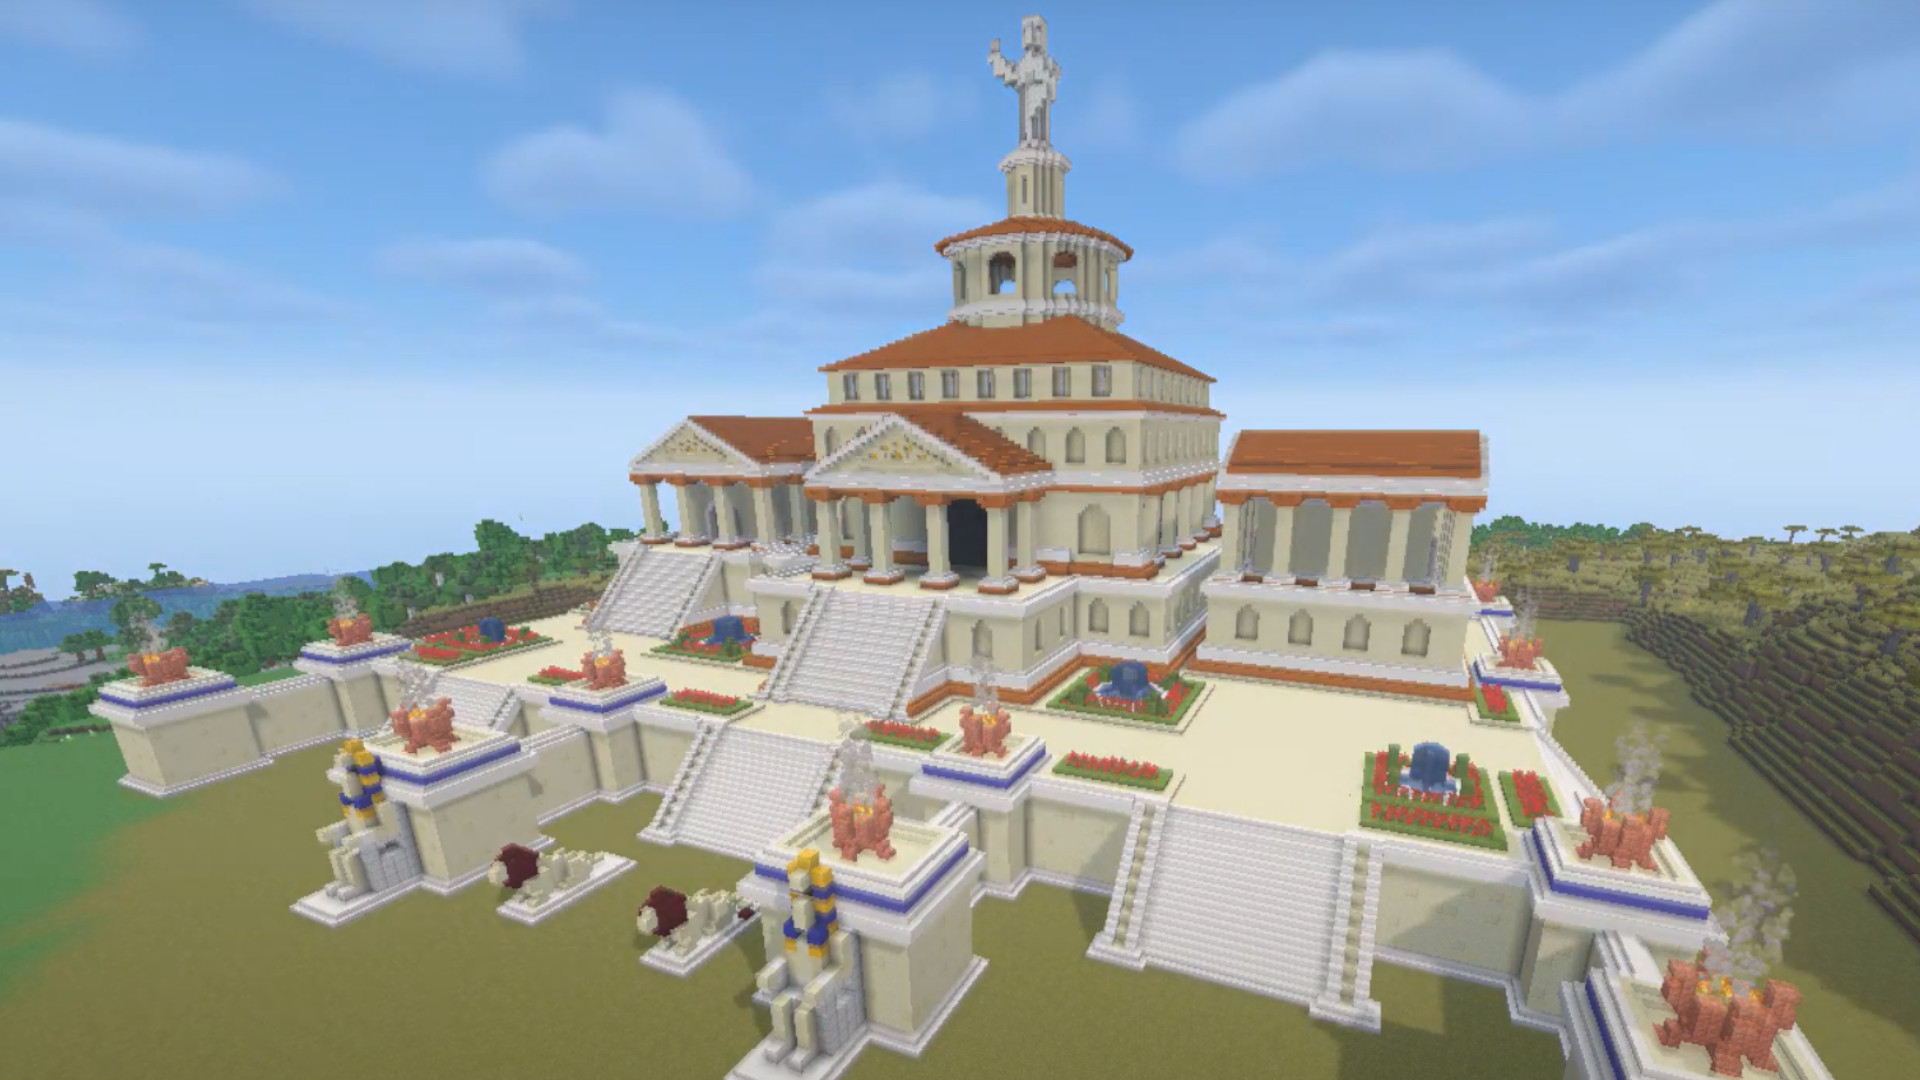 This Minecraft Civ 6 build is a wonder to behold